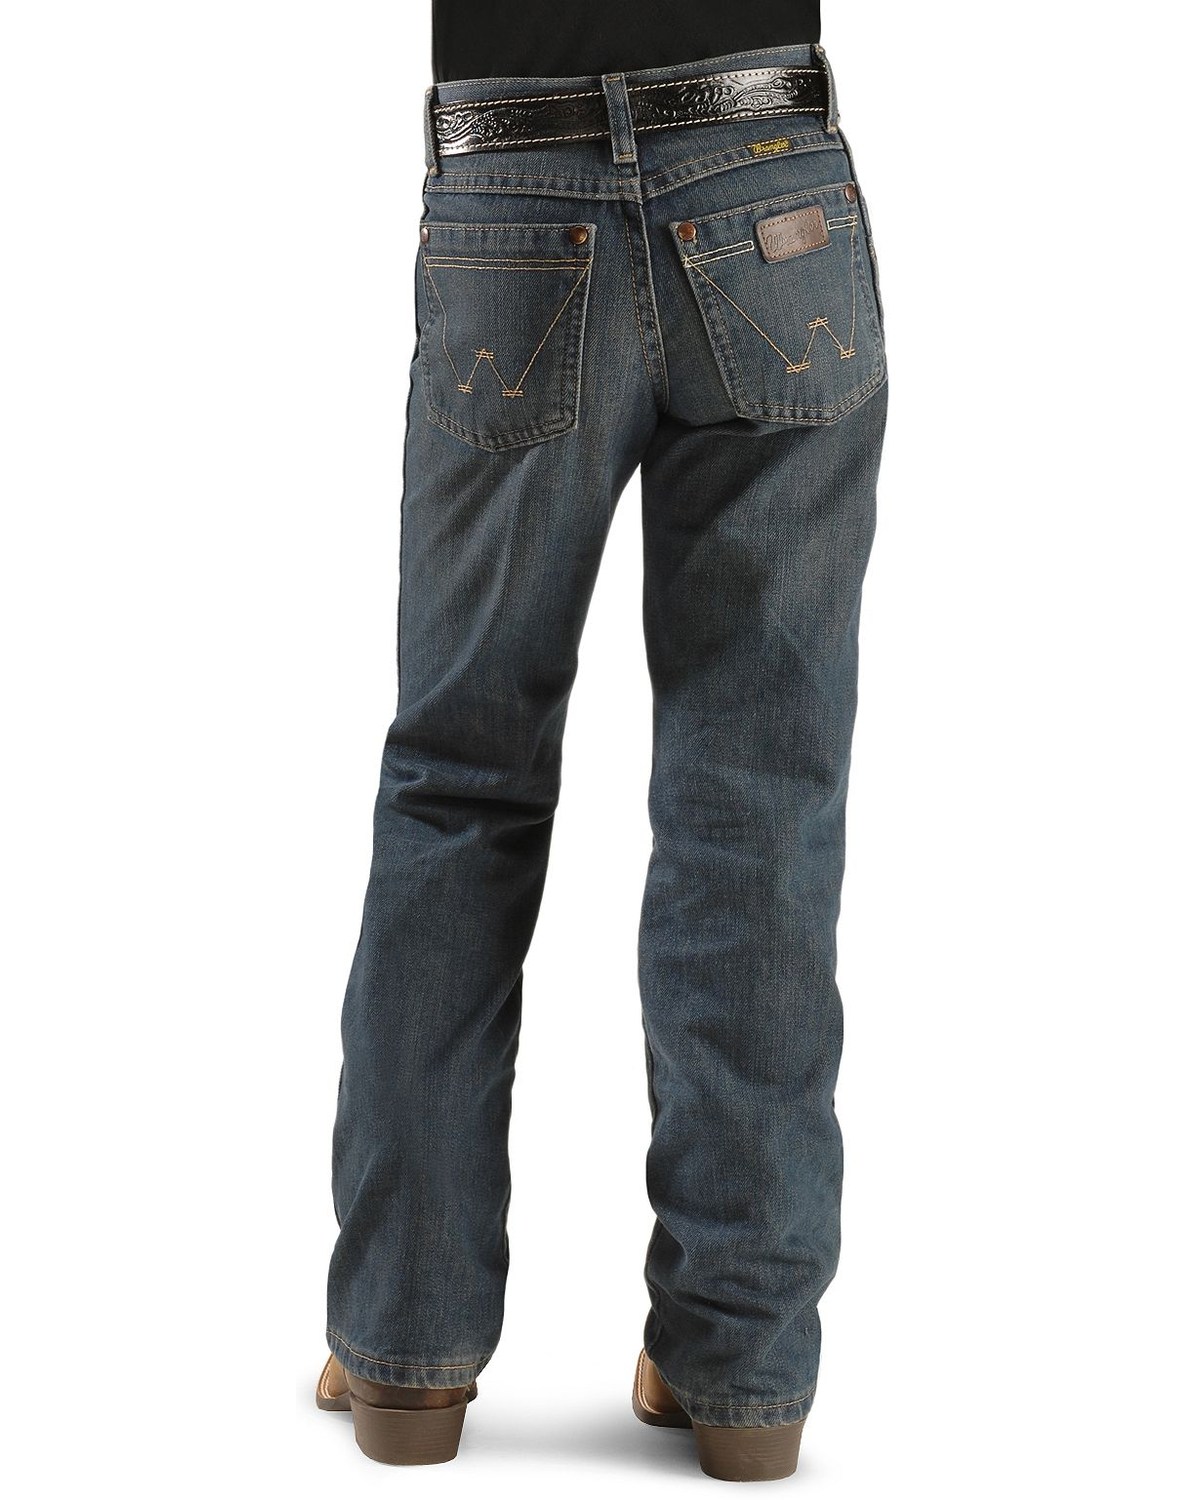 Wrangler Boy's Retro Relaxed Fit Boot Cut Jeans